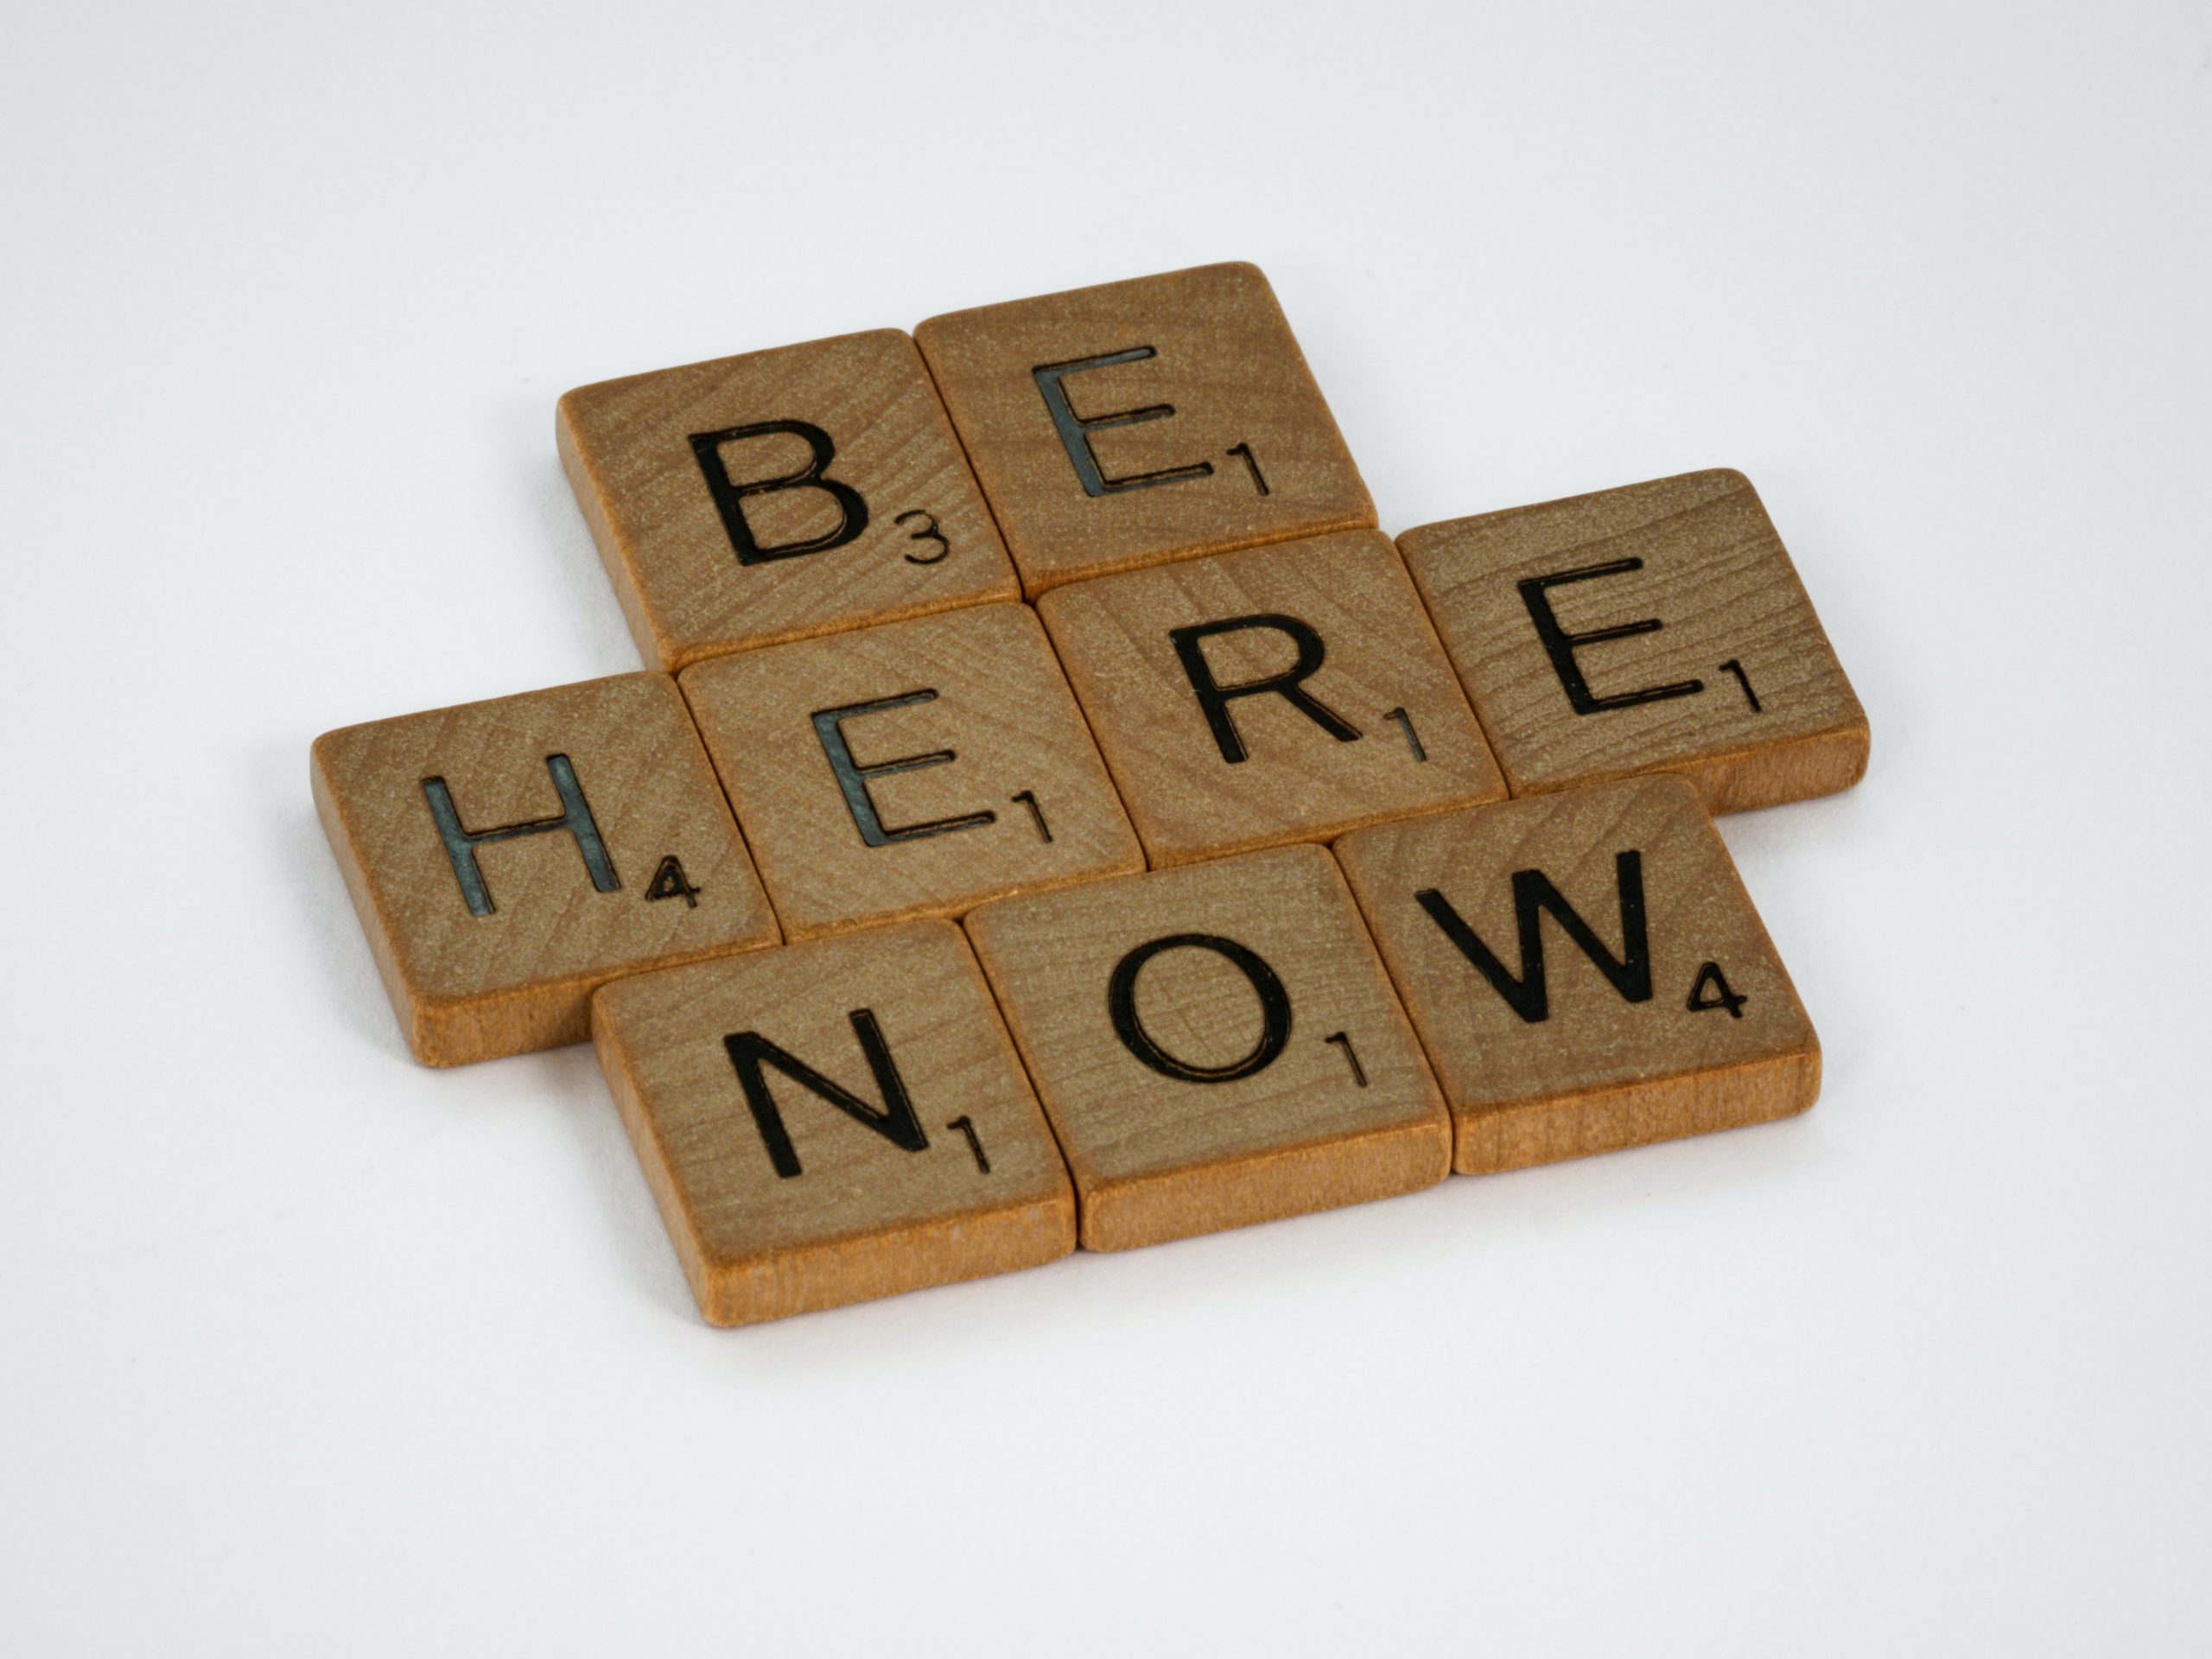 "BE HERE NOW" on tiles